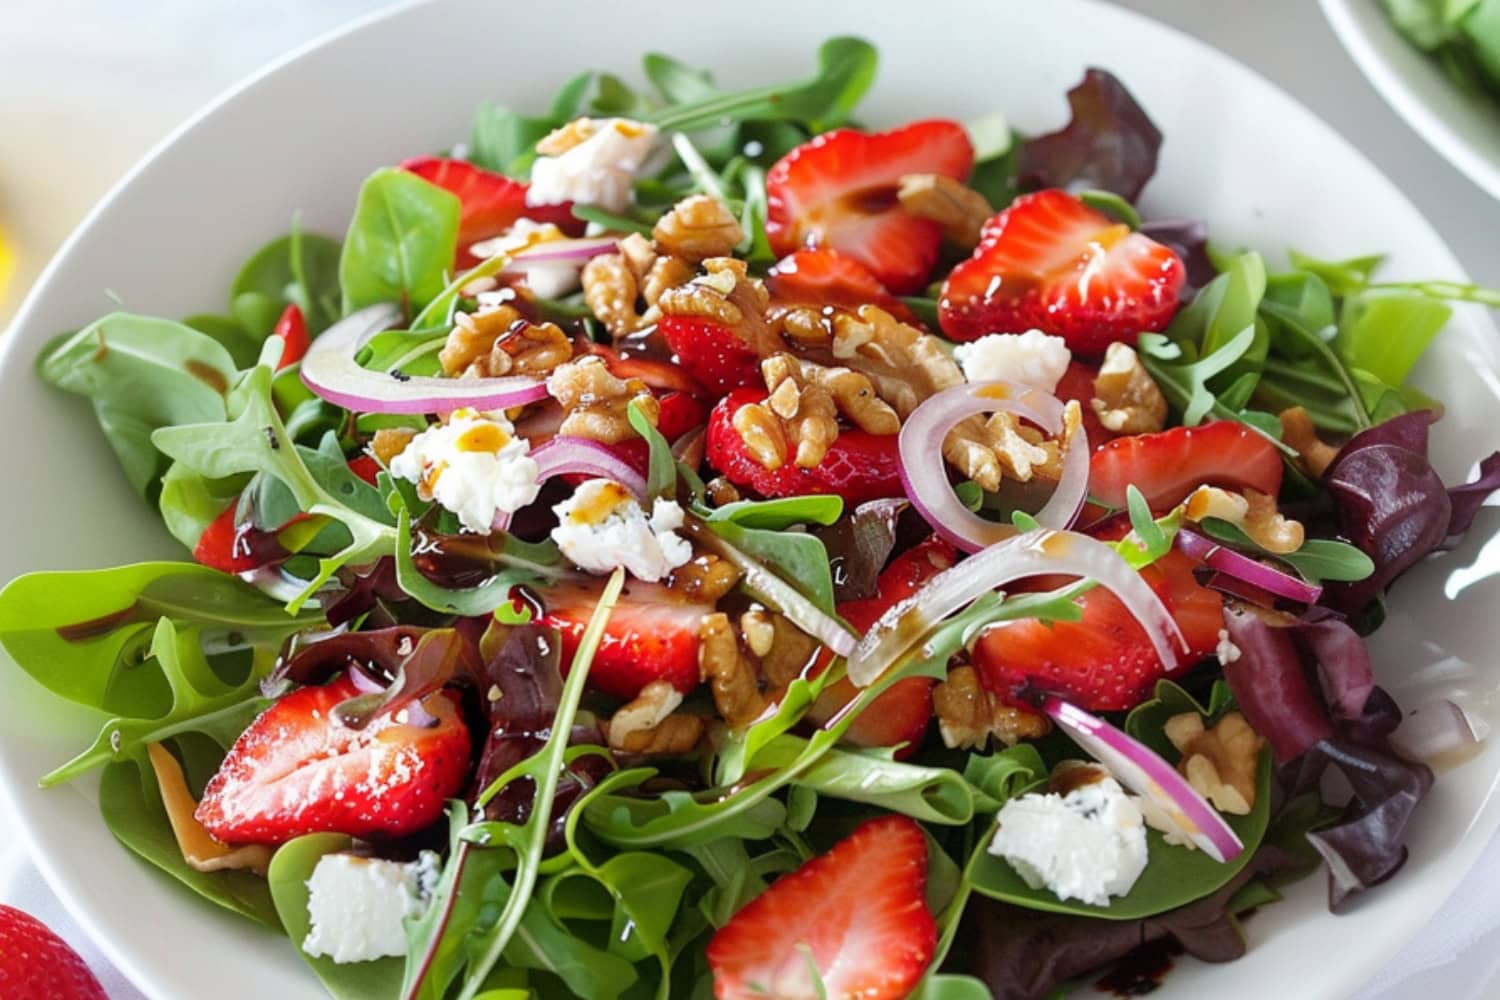 Bowl of mixed greens, sliced strawberries, red onion, and toasted walnuts with goat cheese